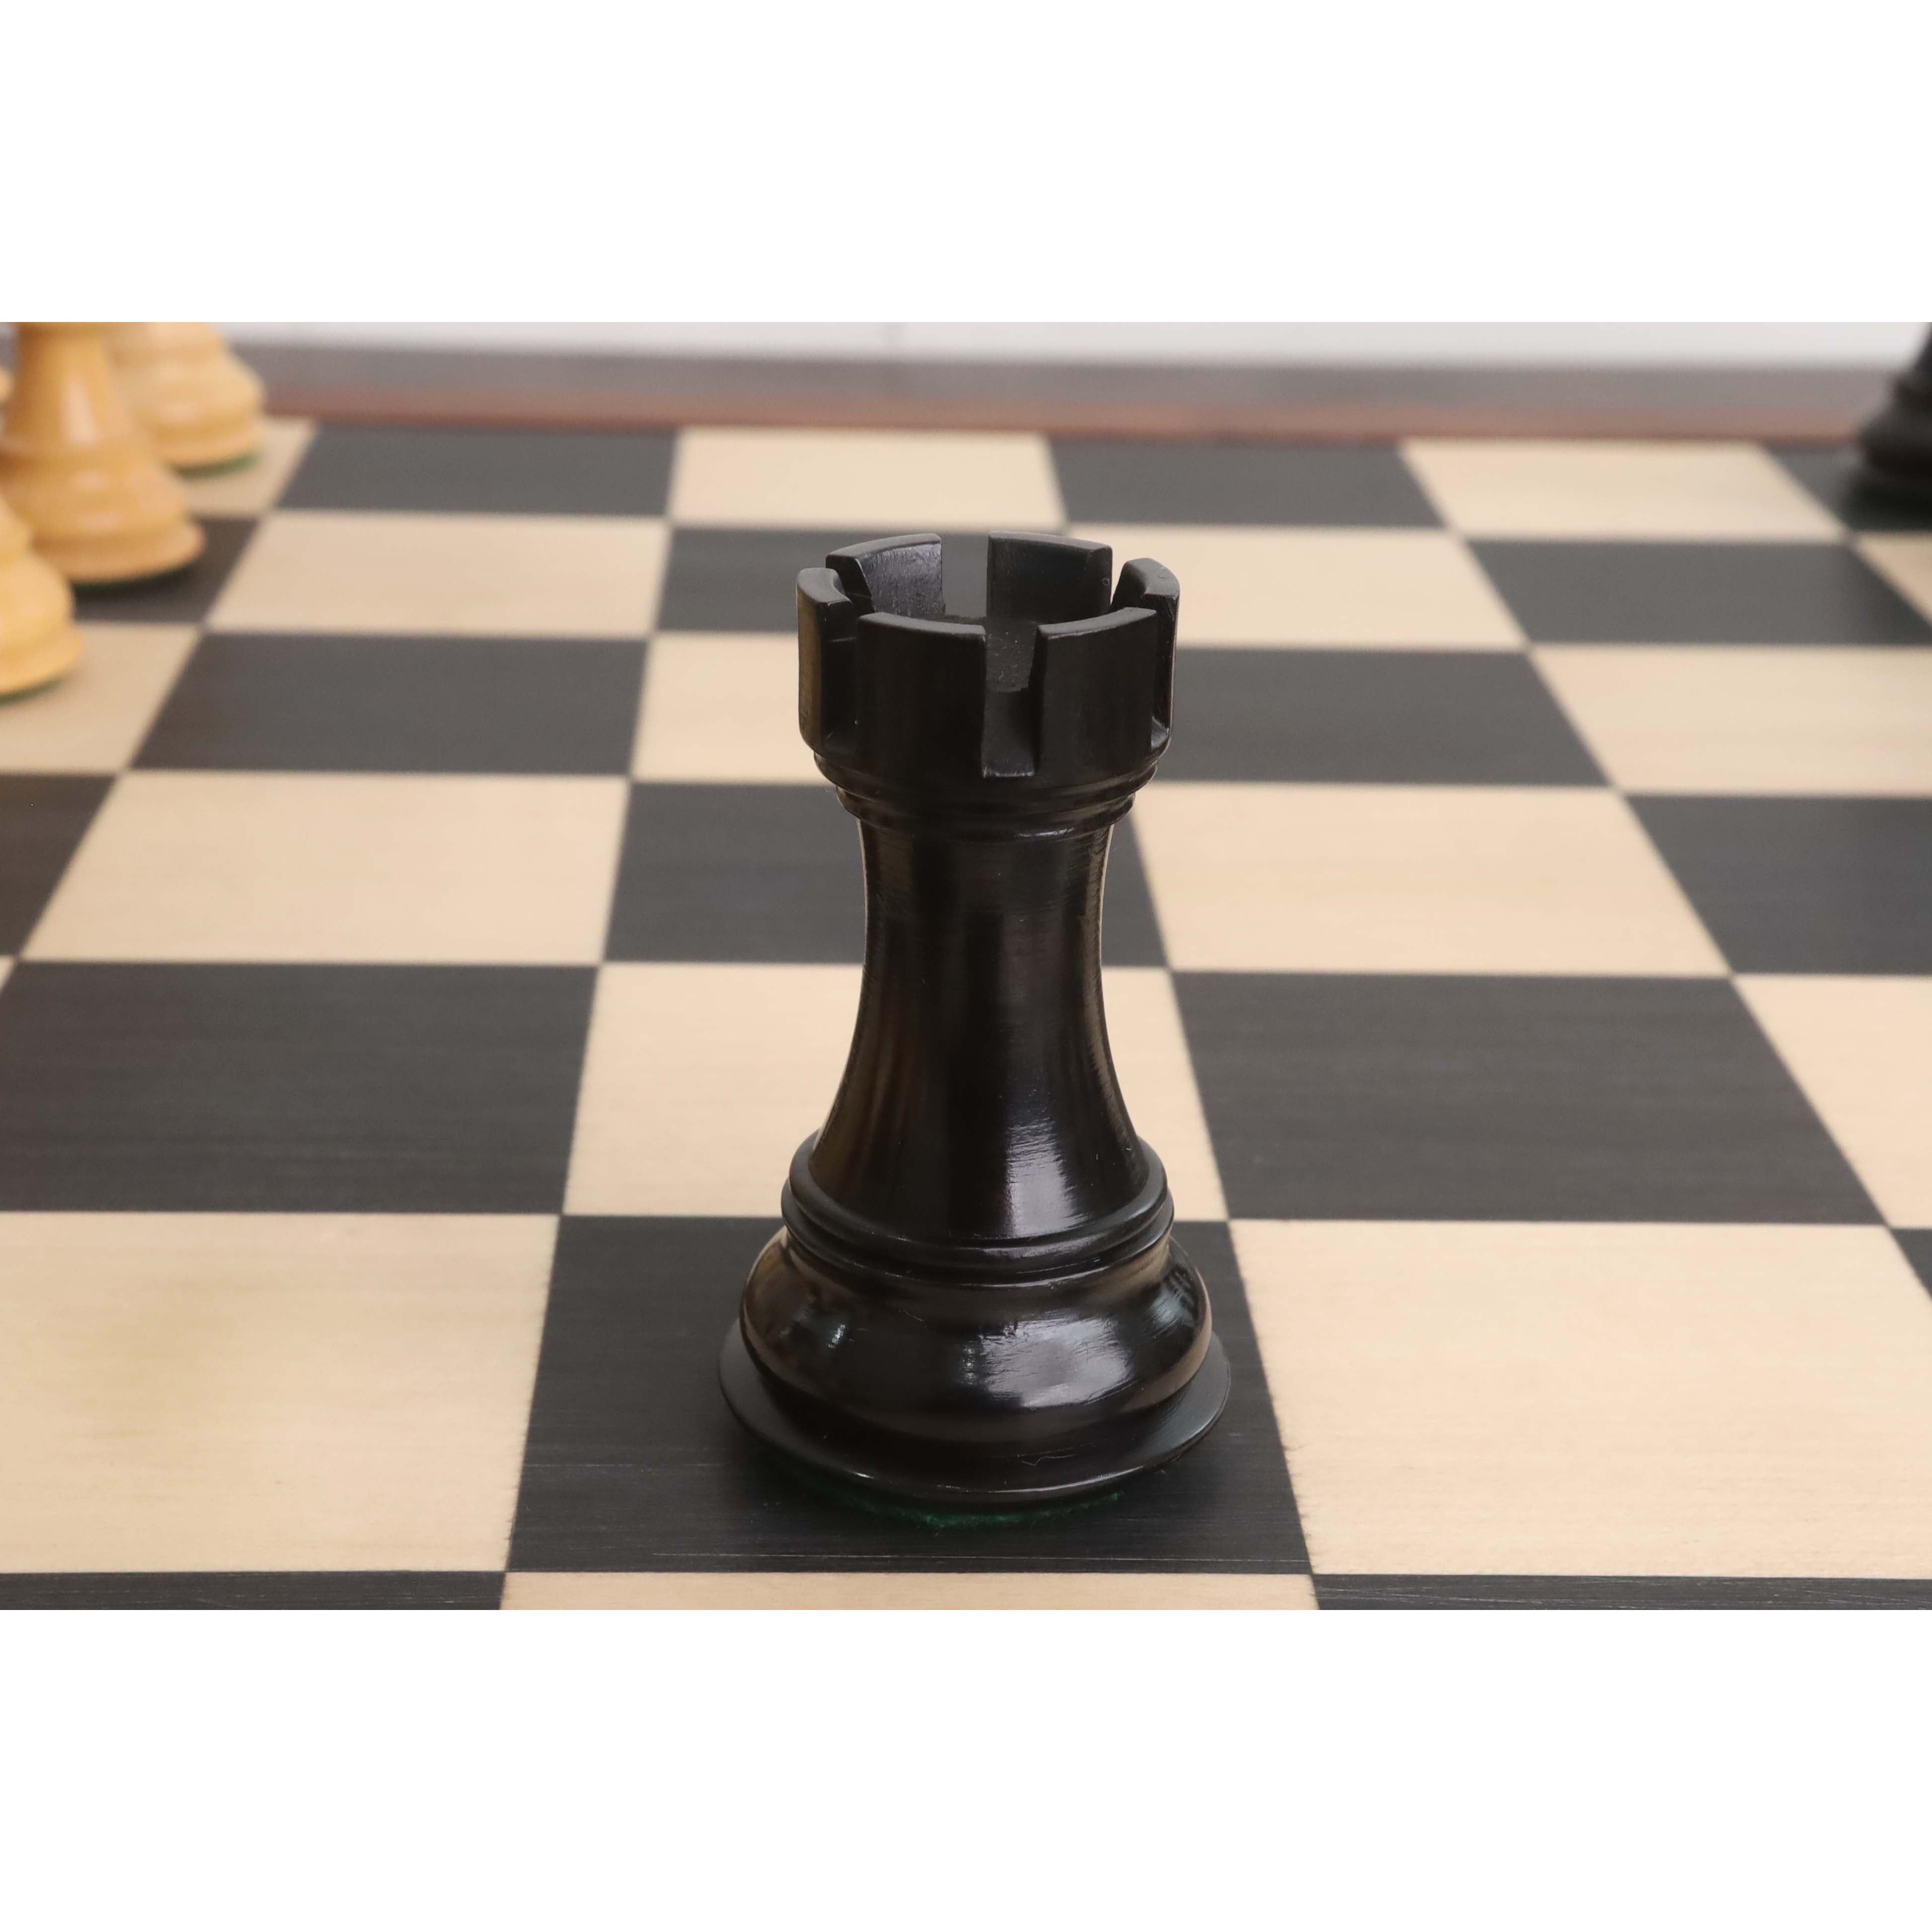 4" Fierce Knight Staunton Chess Pieces Only set - Weighted Ebonised Boxwood